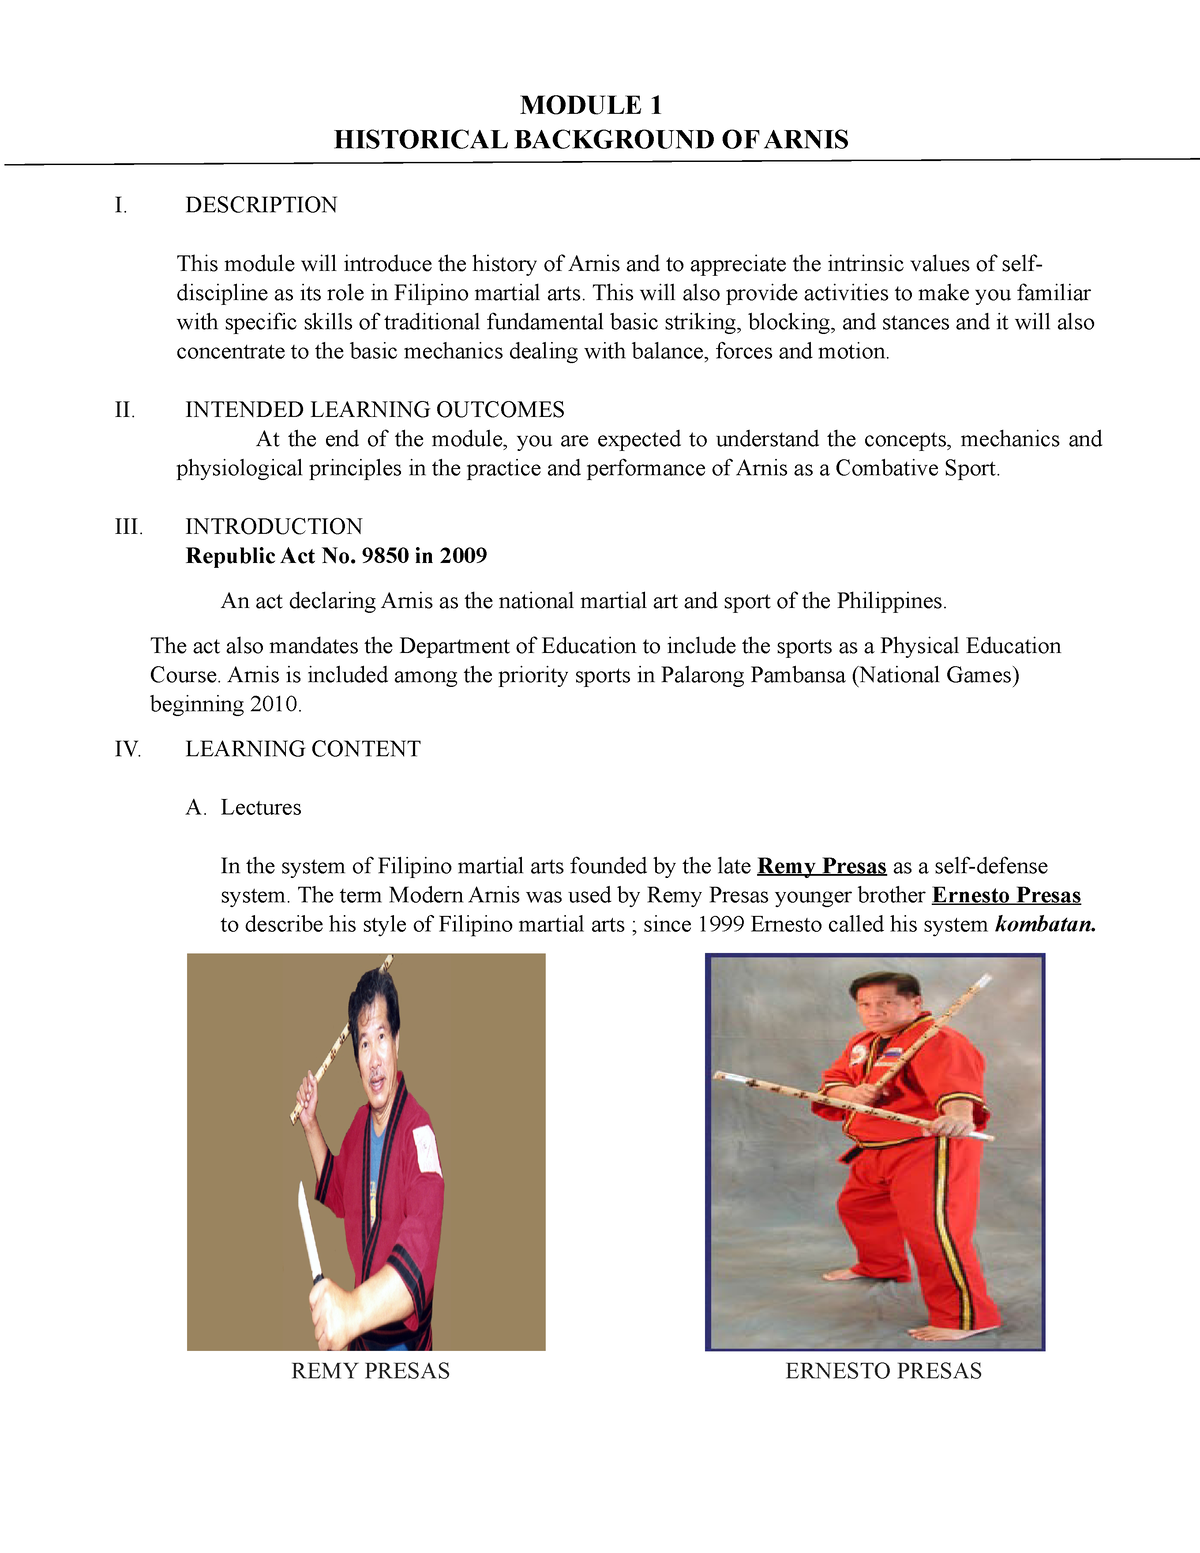 make an essay on the importance of arnis training